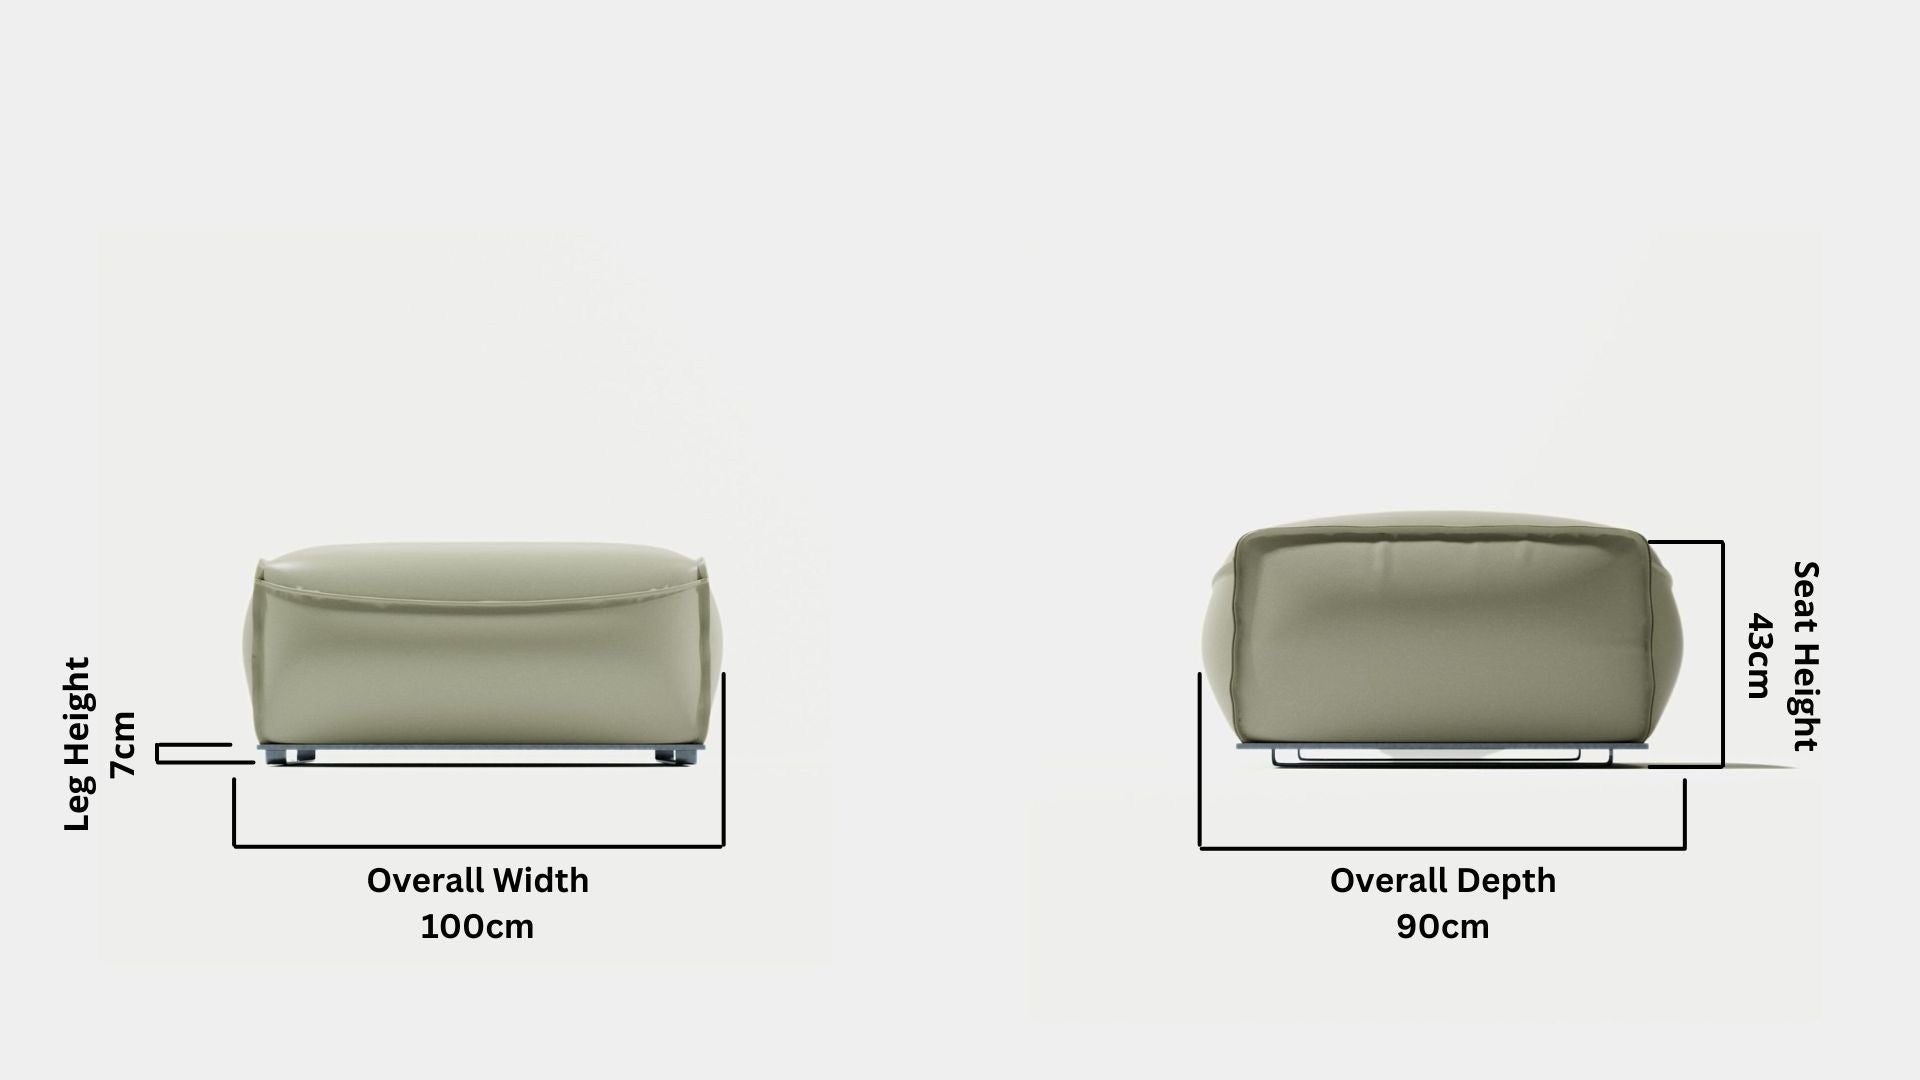 Details the key dimensions in terms of overall width, overall depth and seat width for Colby Full Leather Ottoman